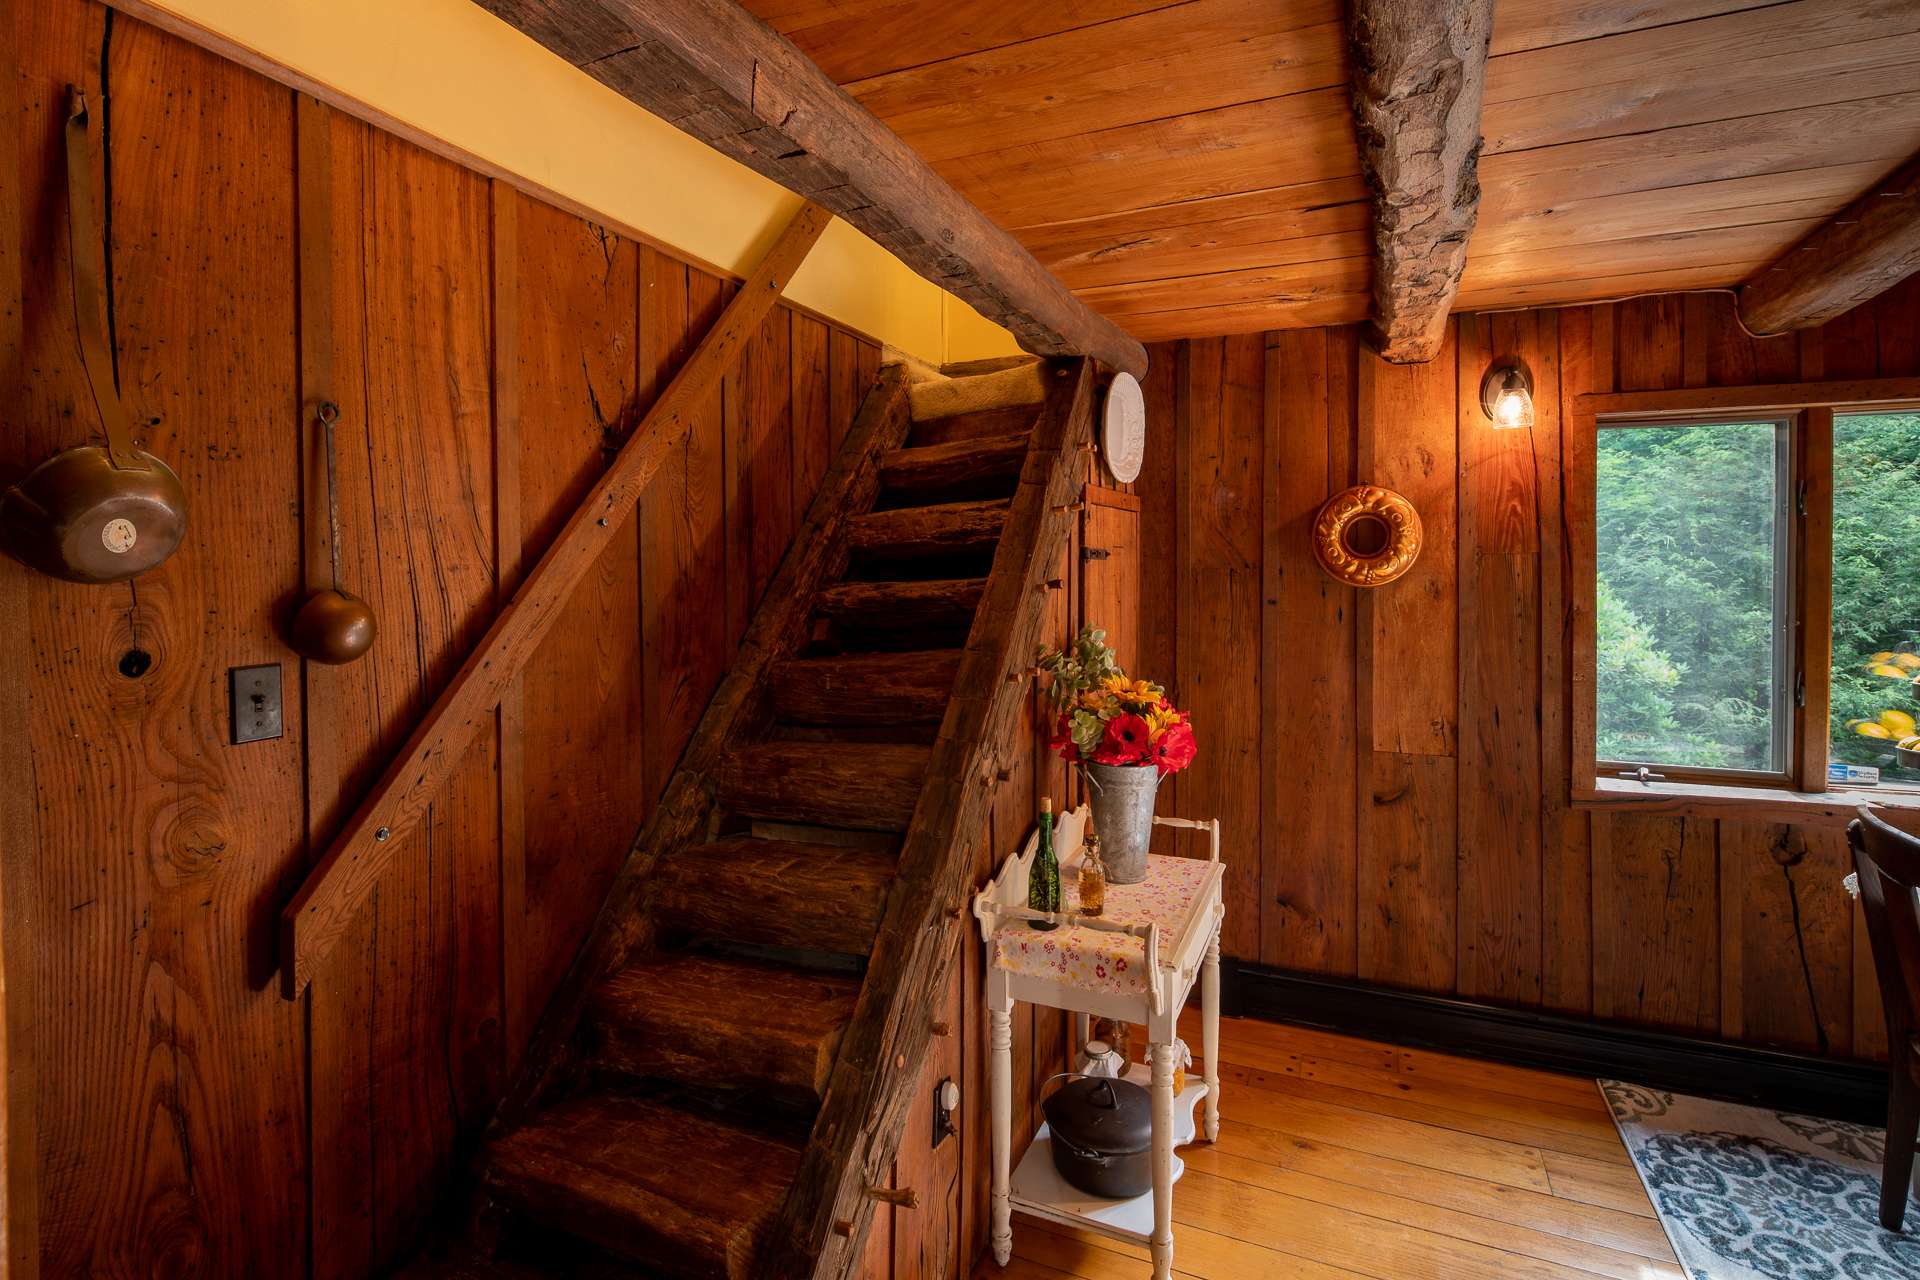 Original hand-hewn stairs leading to the second bedroom on the upper level.